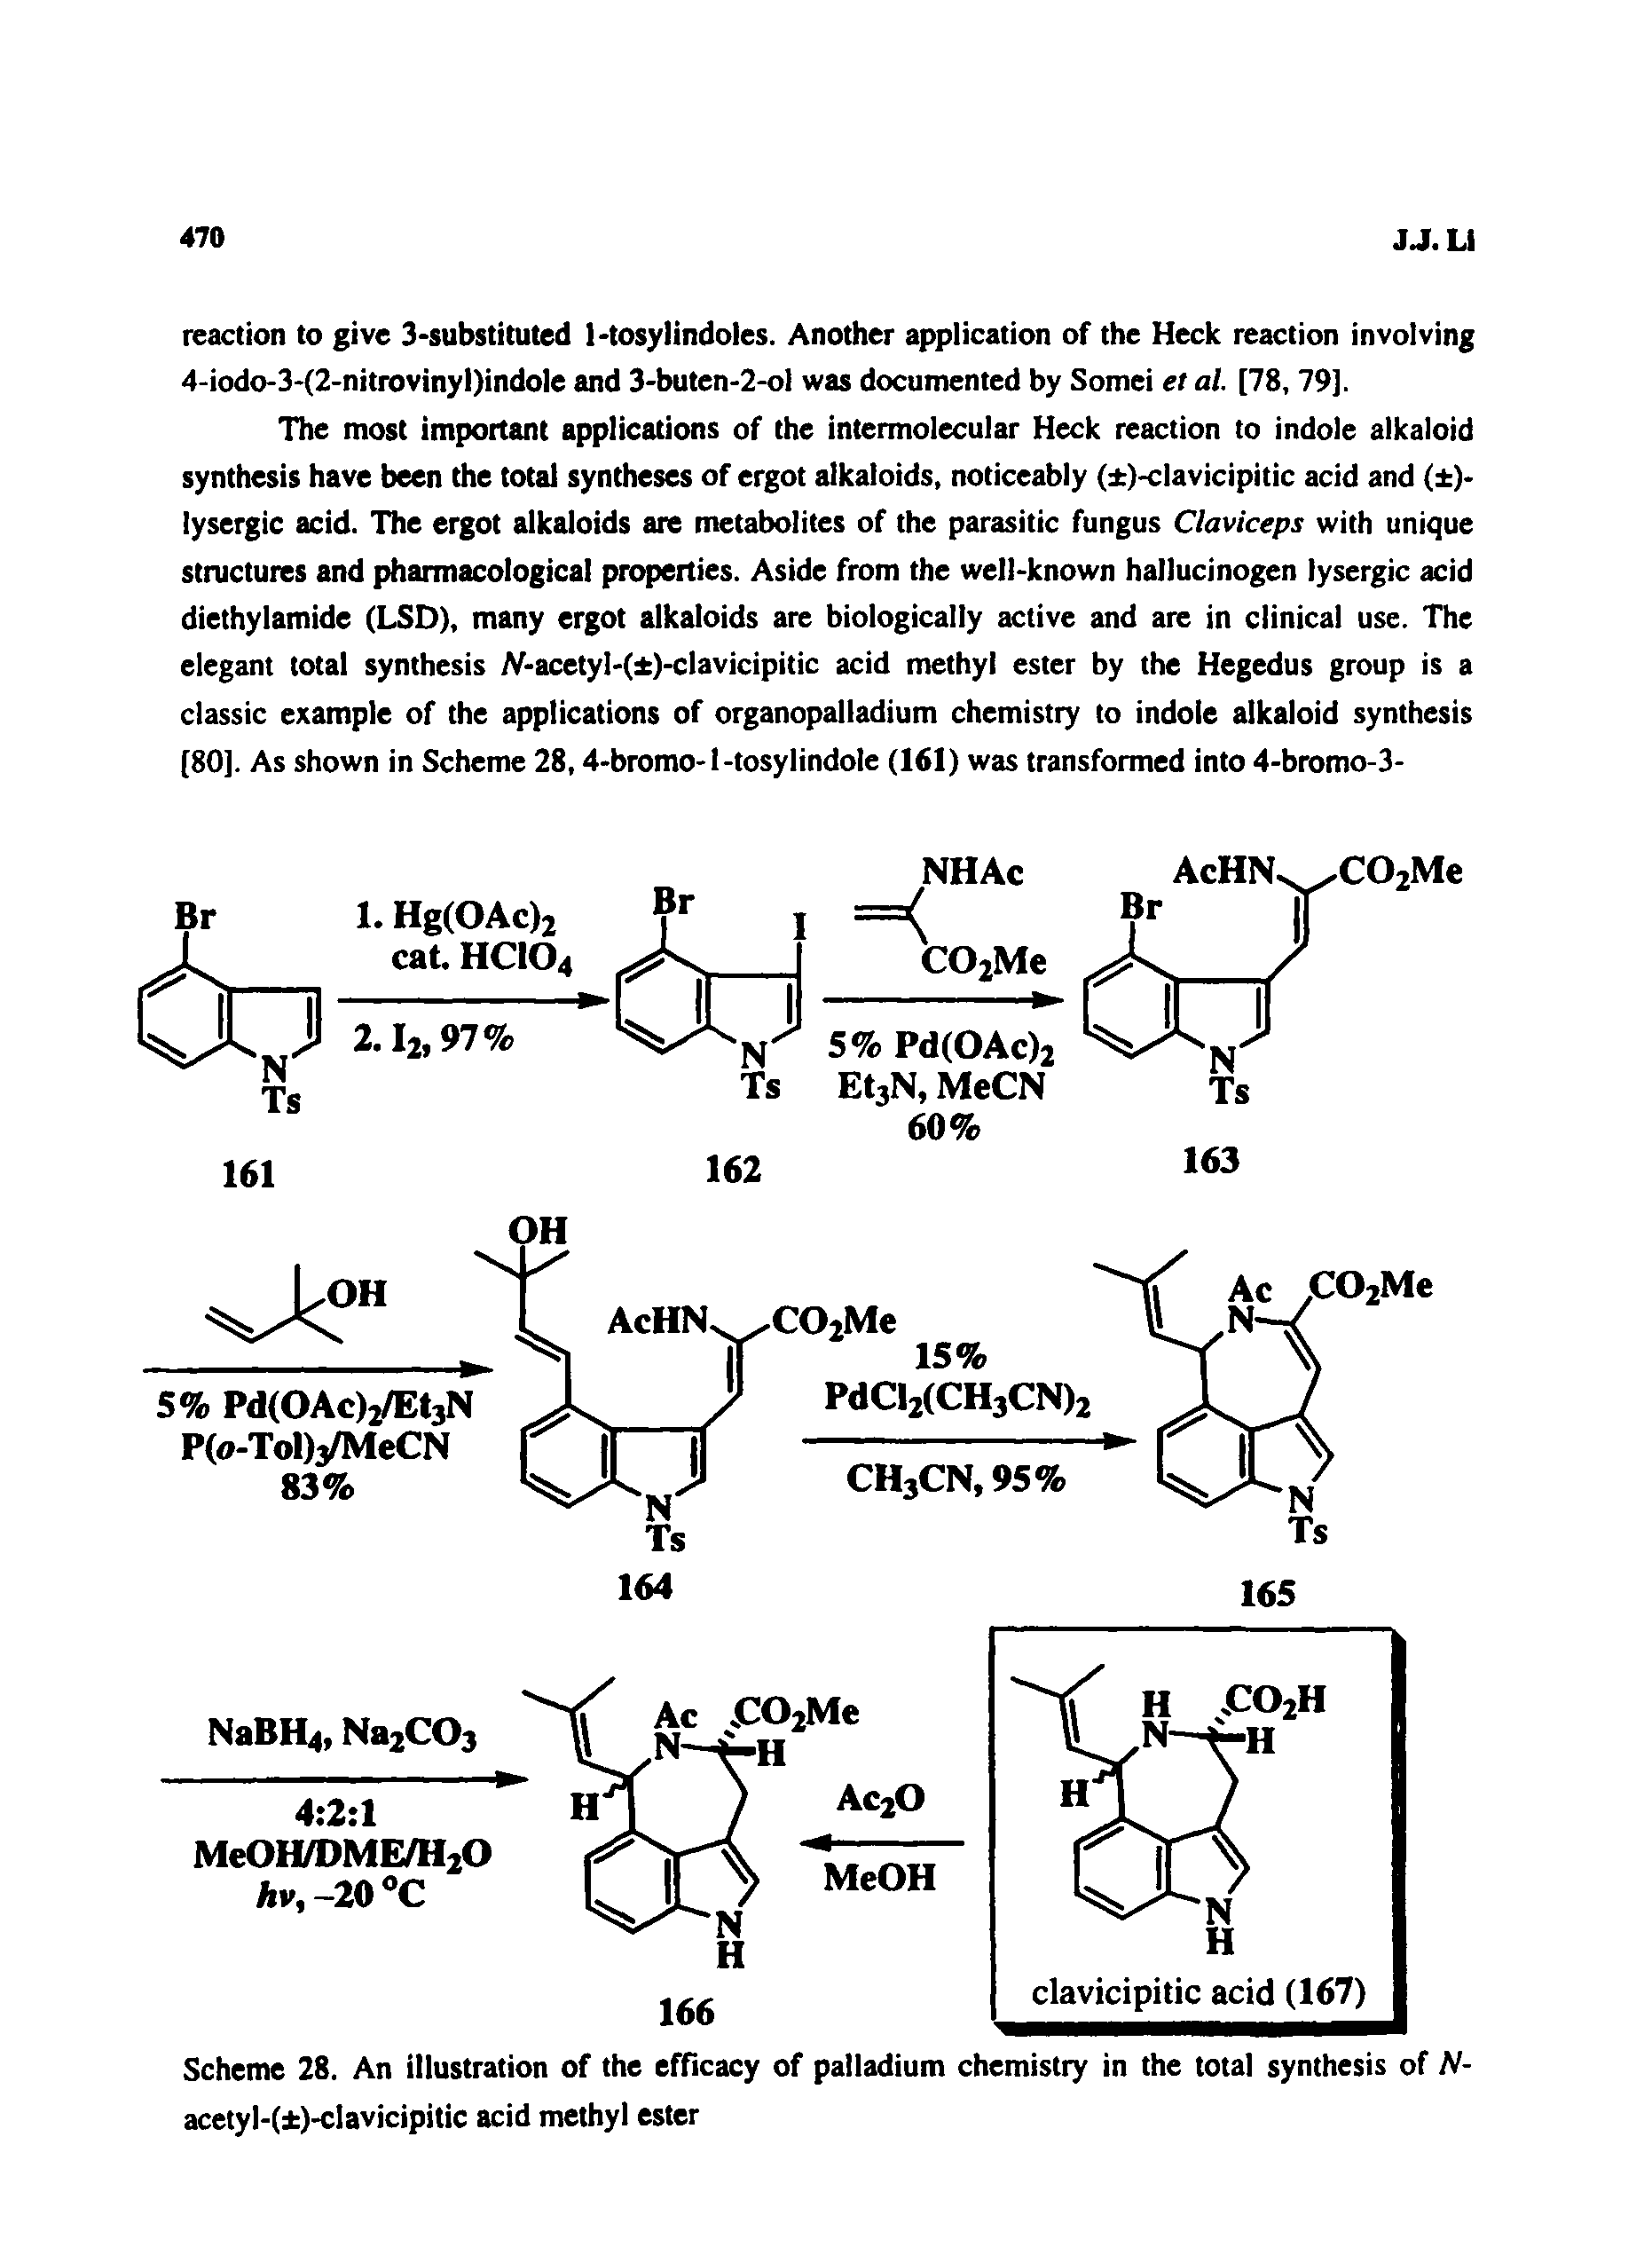 Scheme 28. An illustration of the efficacy of palladium chemistry in the total synthesis of N-acetyl-( )-clavicipitic acid methyl ester...